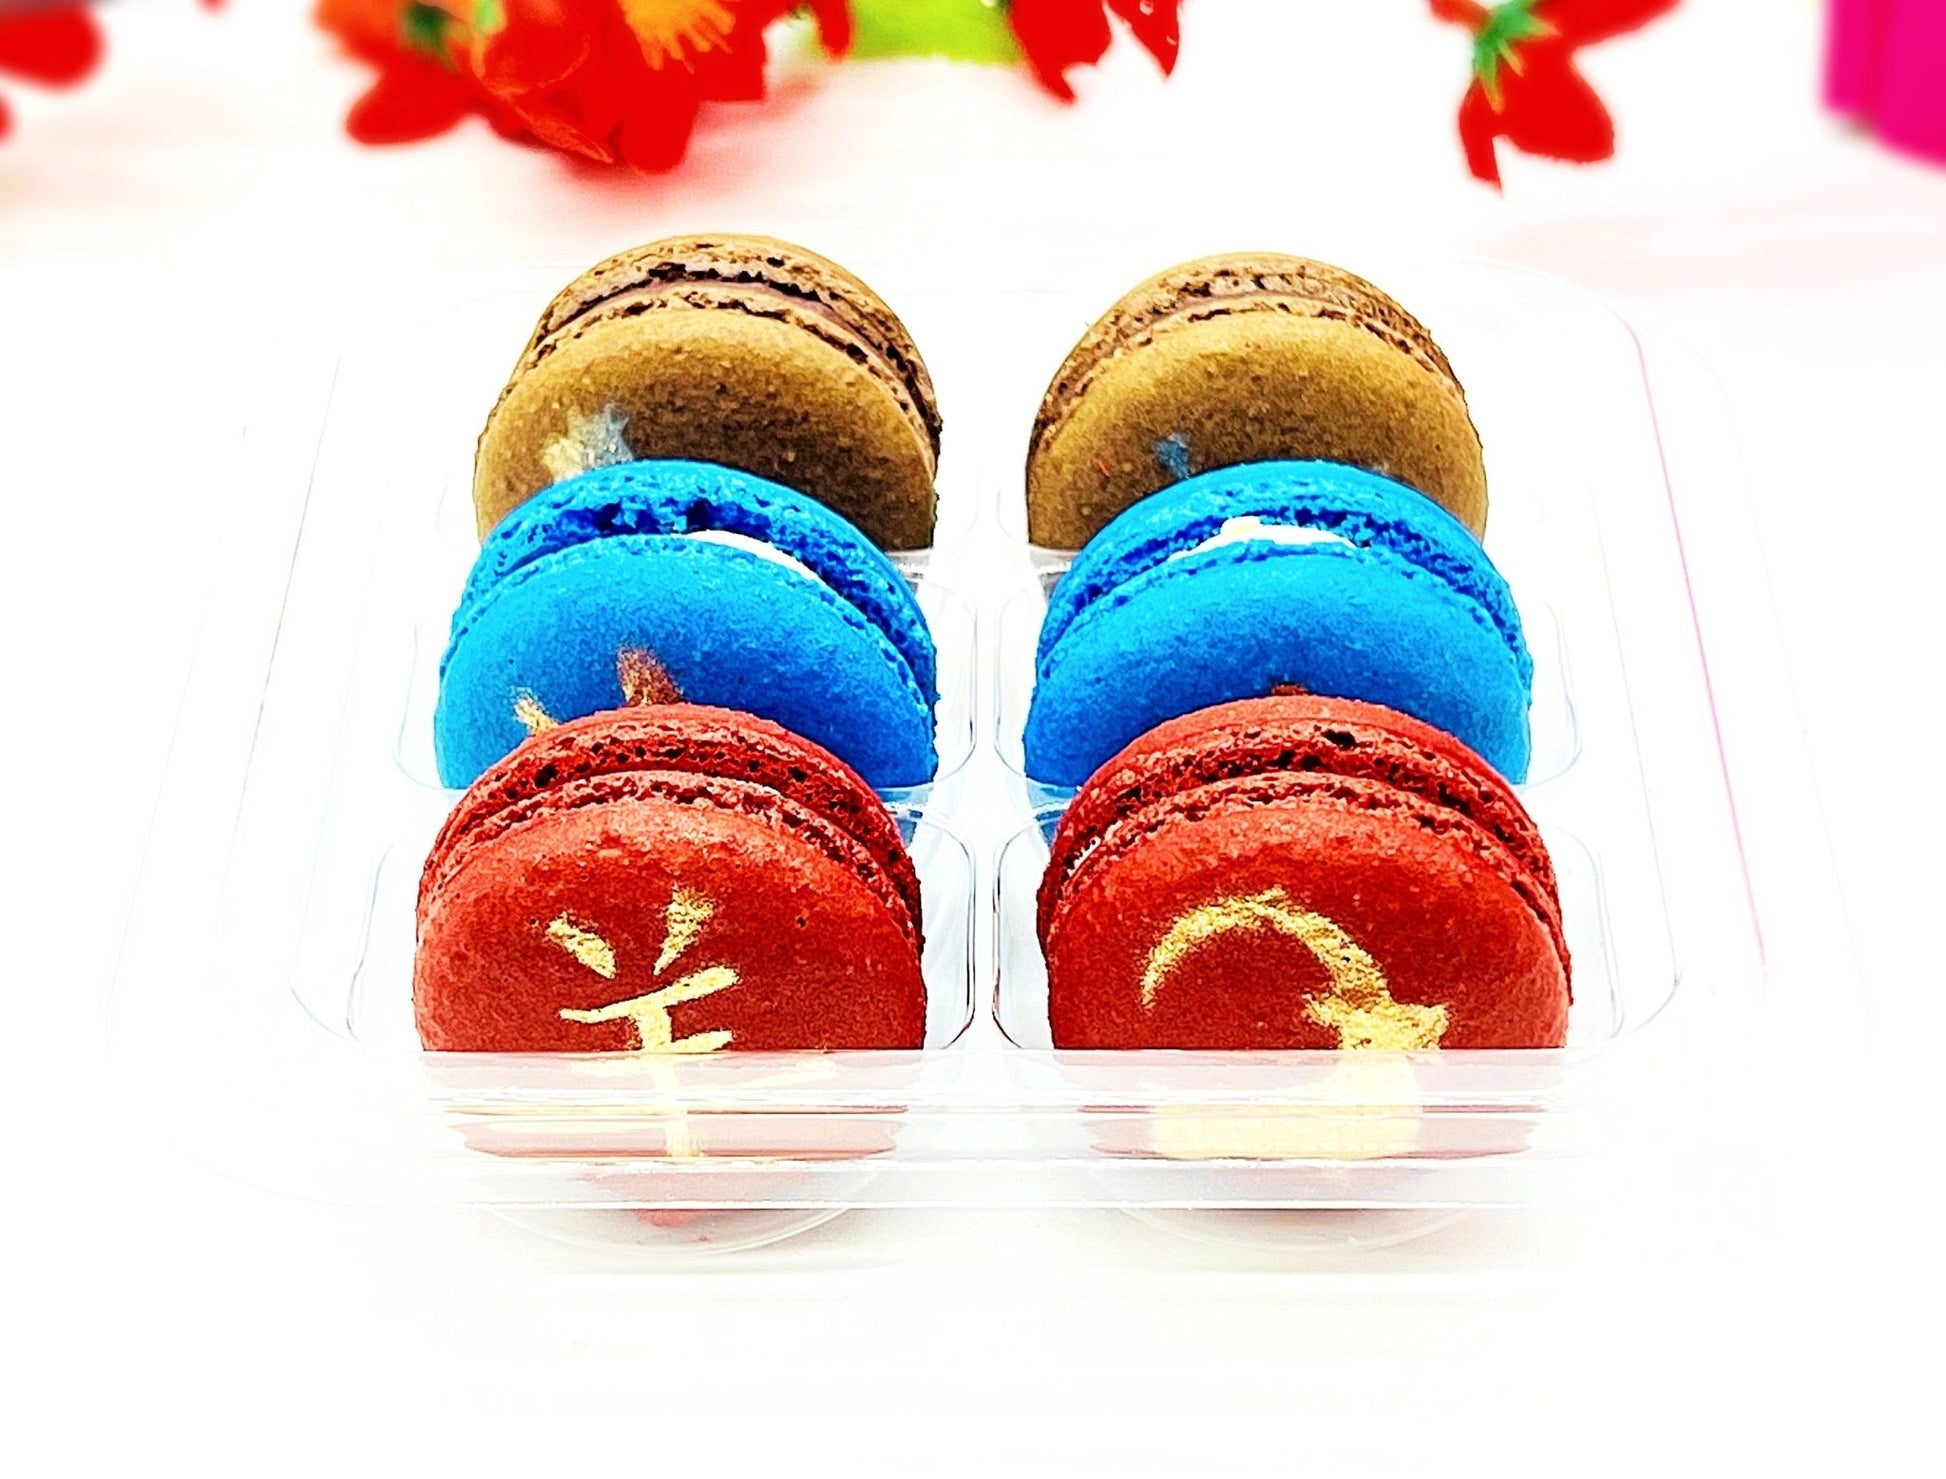 Year of The Goat | Assorted French Macaron decorated with Gold Dust - Macaron CentraleVariety6 Pack